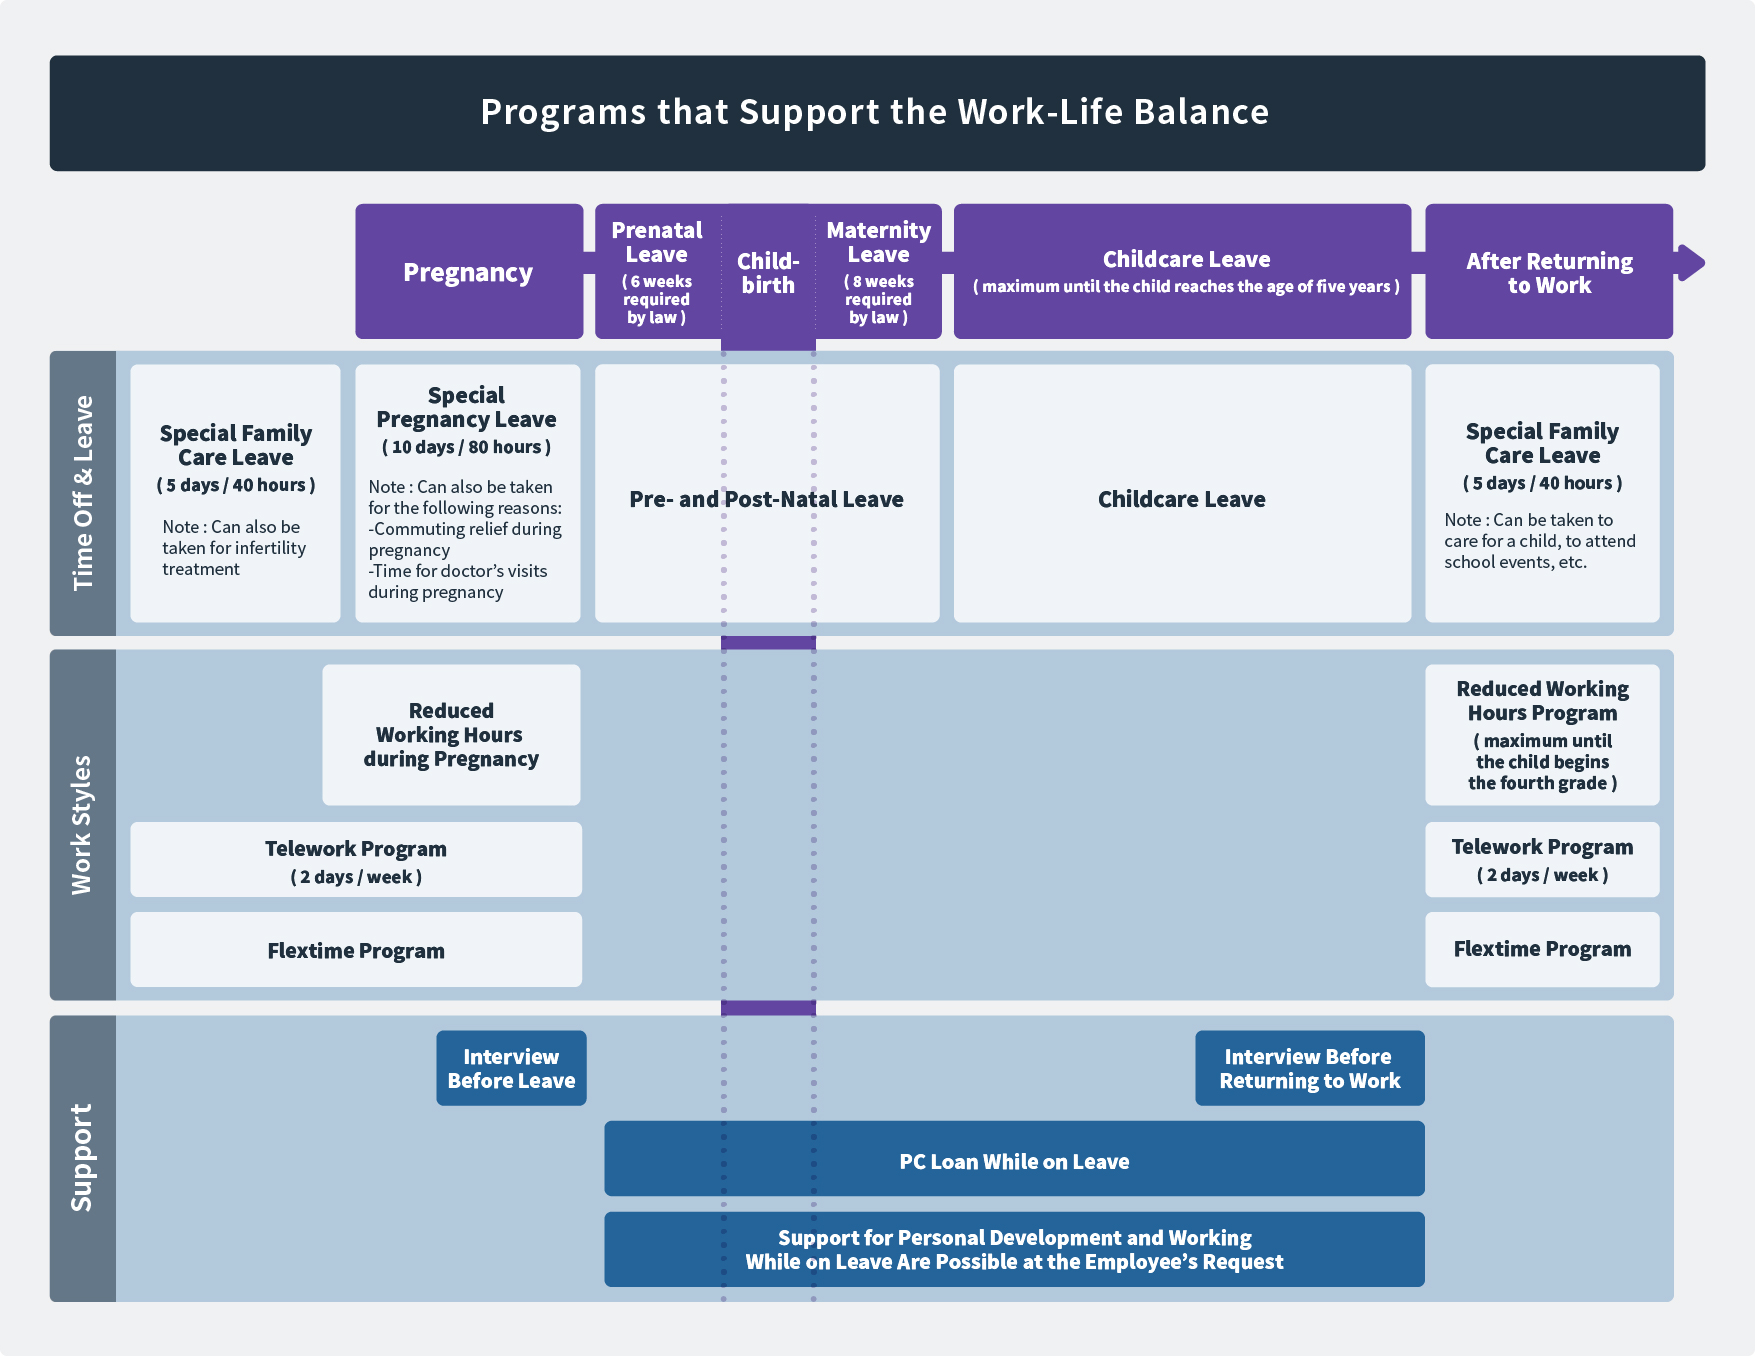 2. Enhancement Programs that Support the Work-Life Balance